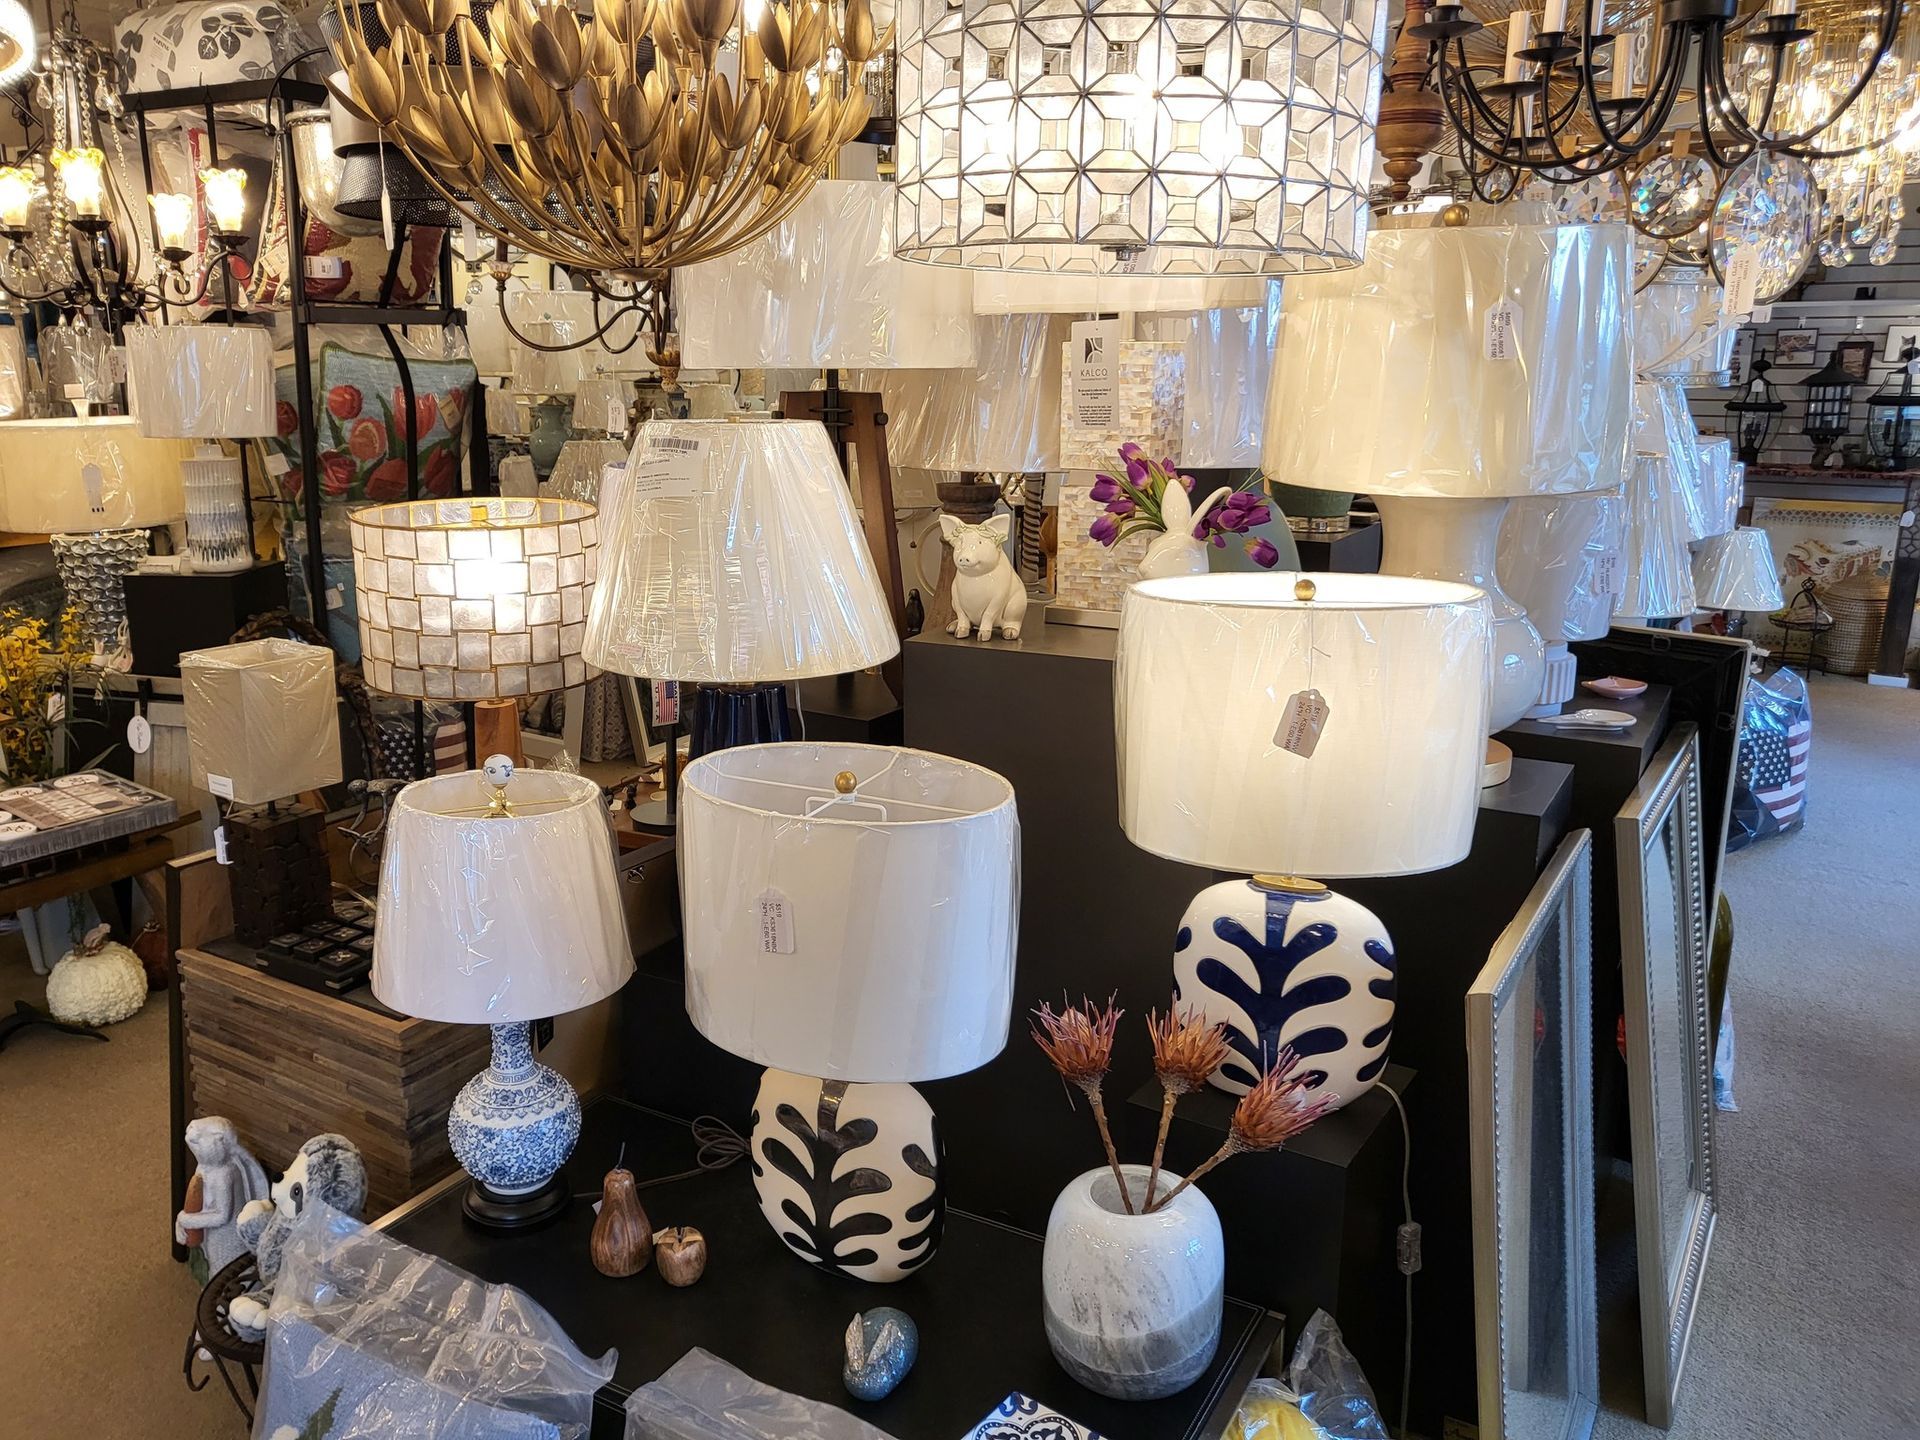 a display of blue and white lamps with white shades